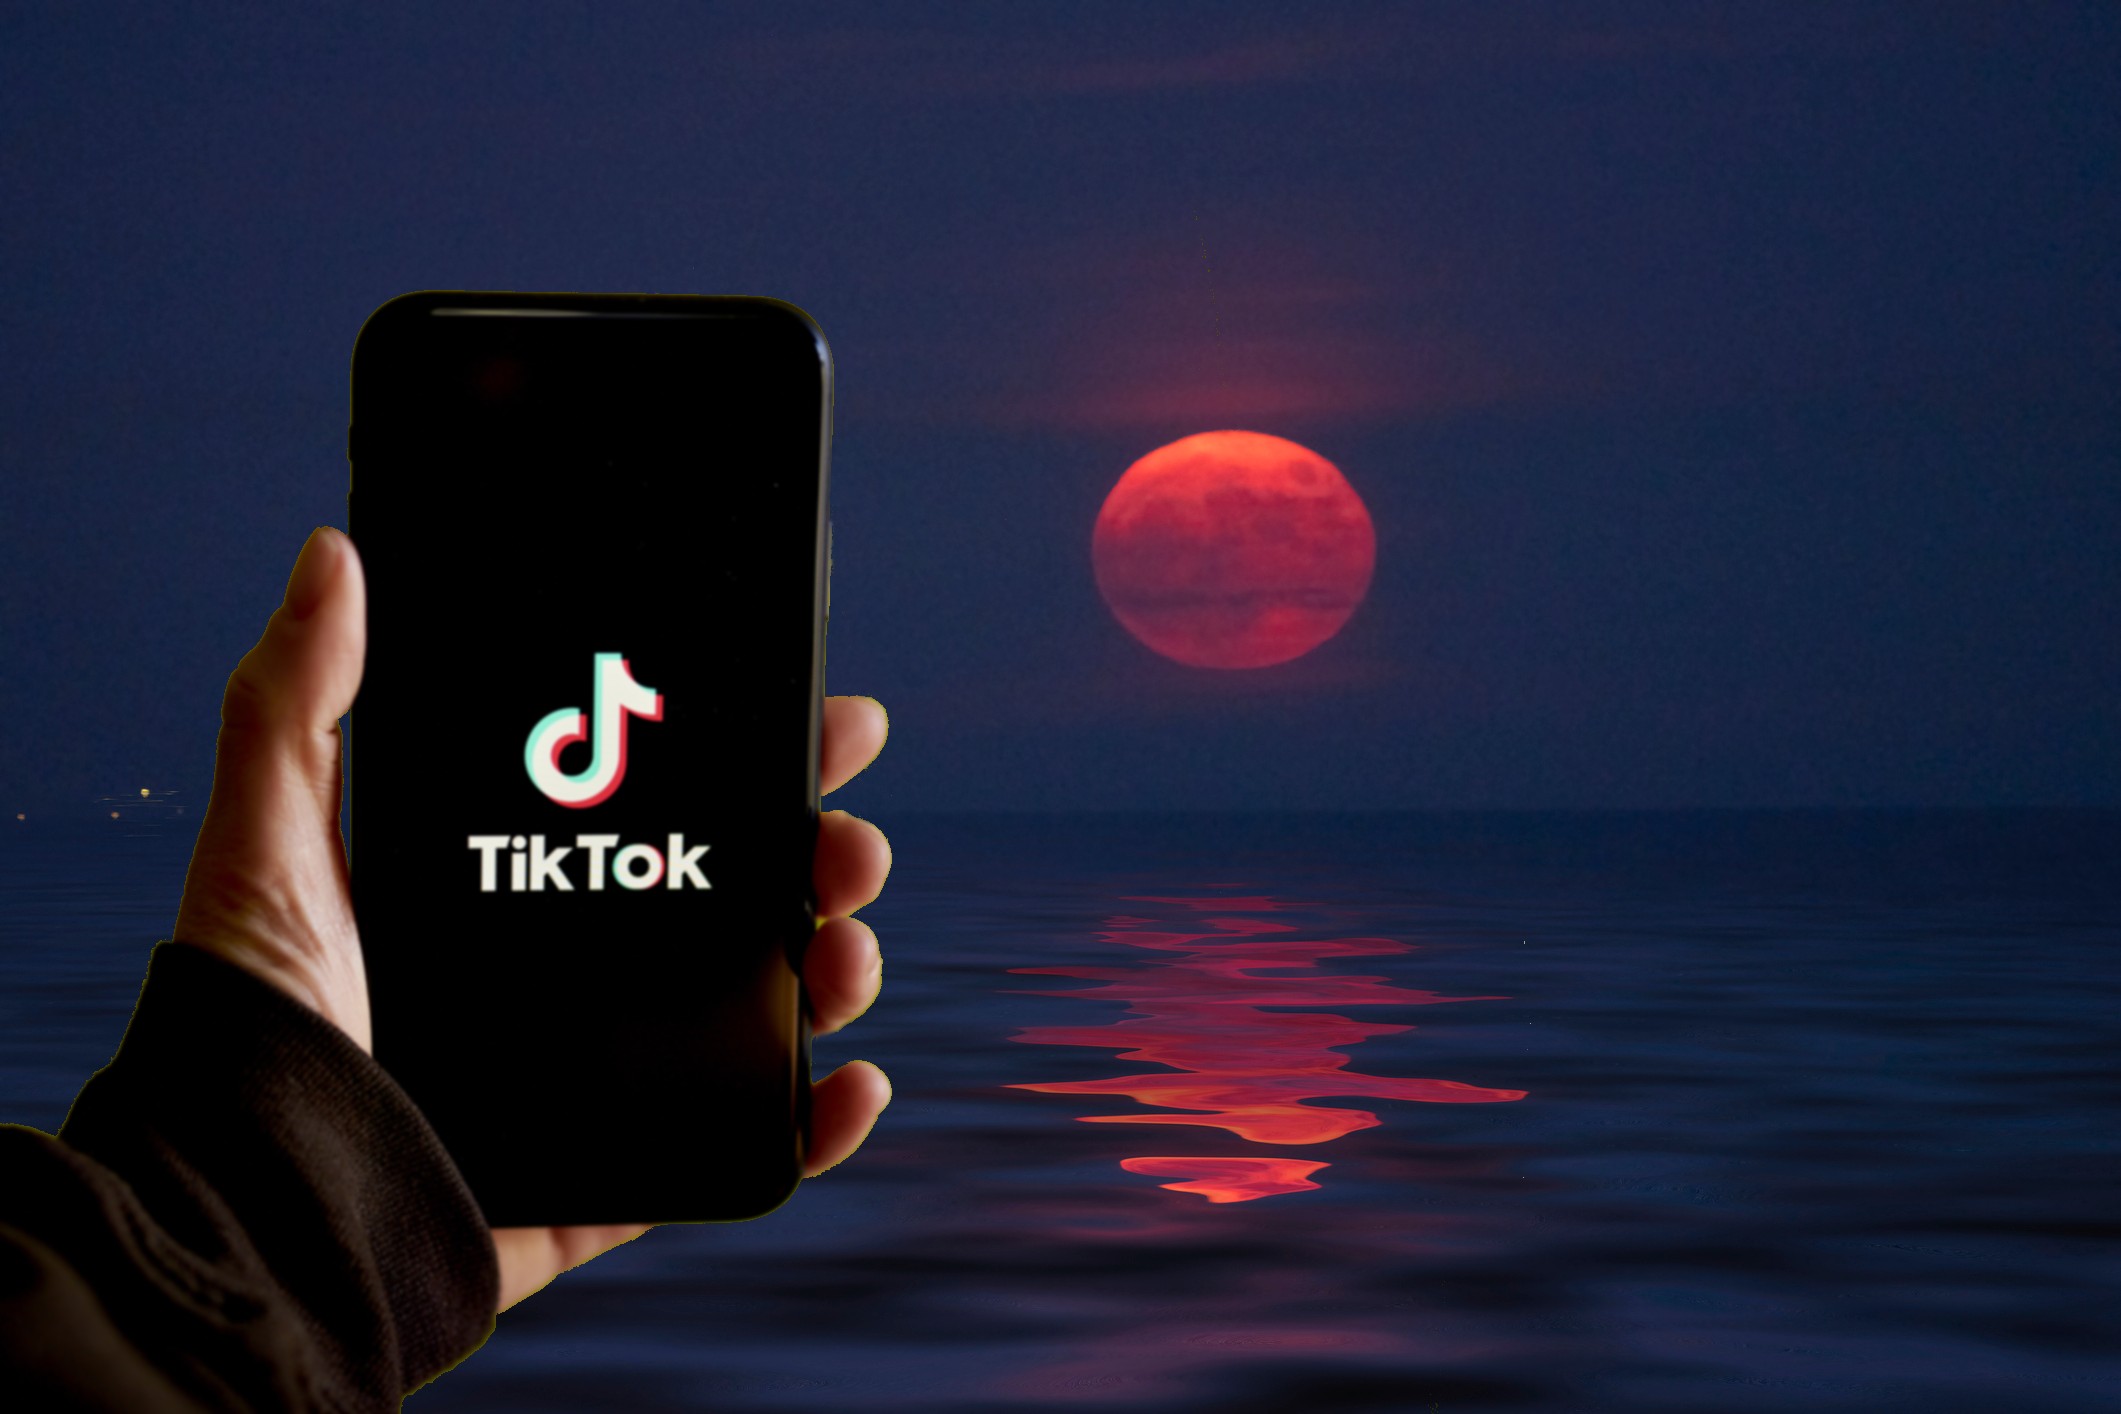 No, the moon phase can't help find your soulmate on TikTok